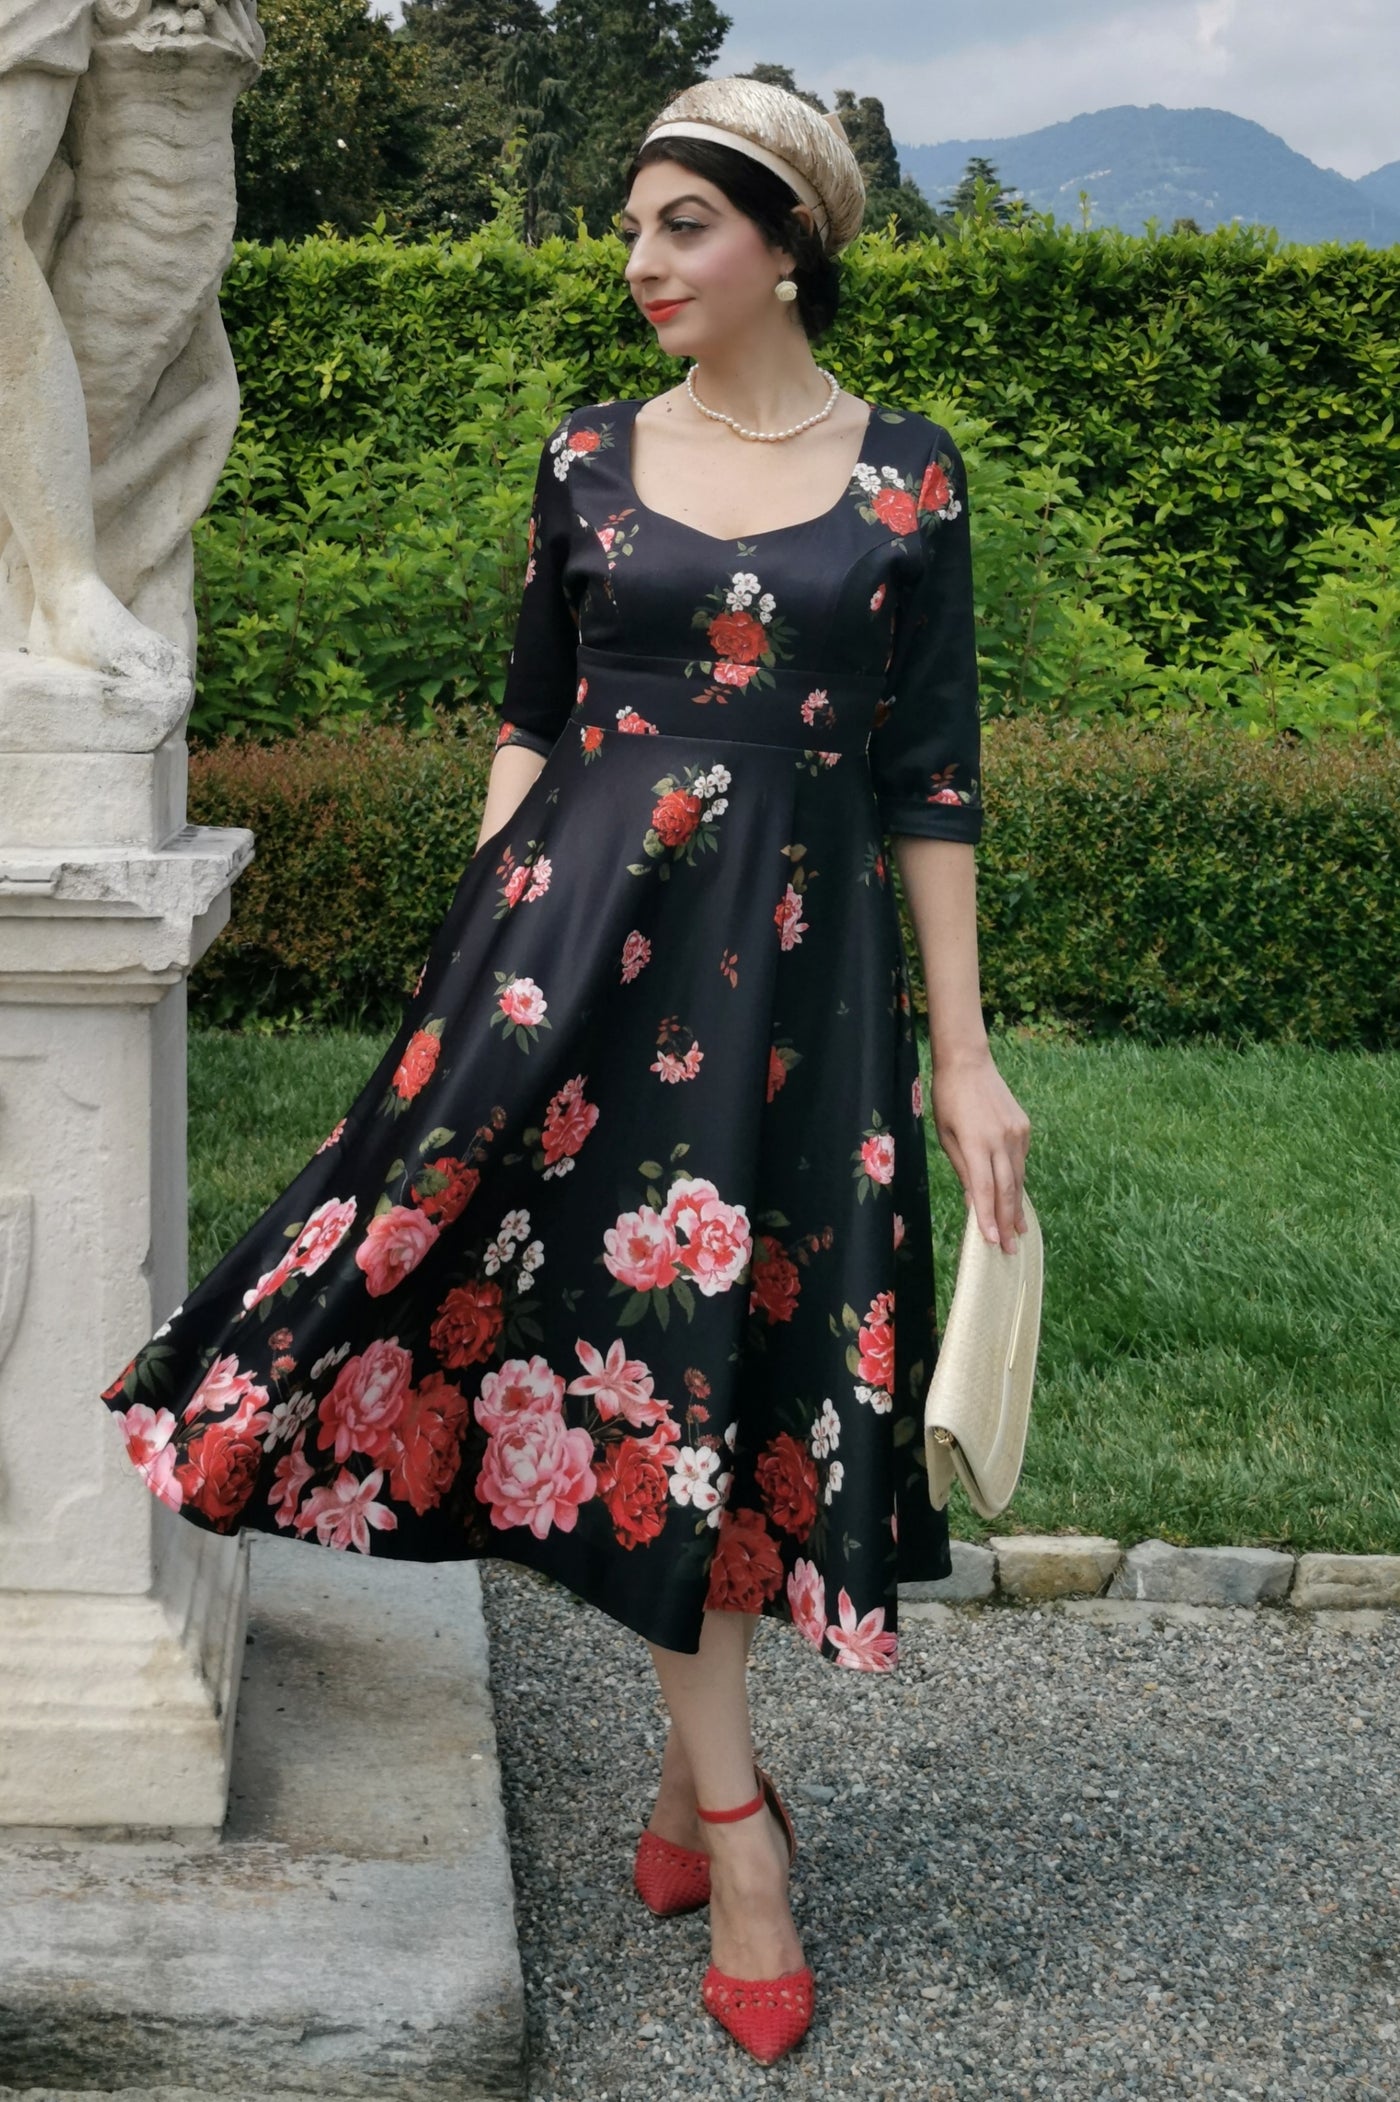 Woman wears our long sleeved, midi dress in black/pink floral print, in a public space